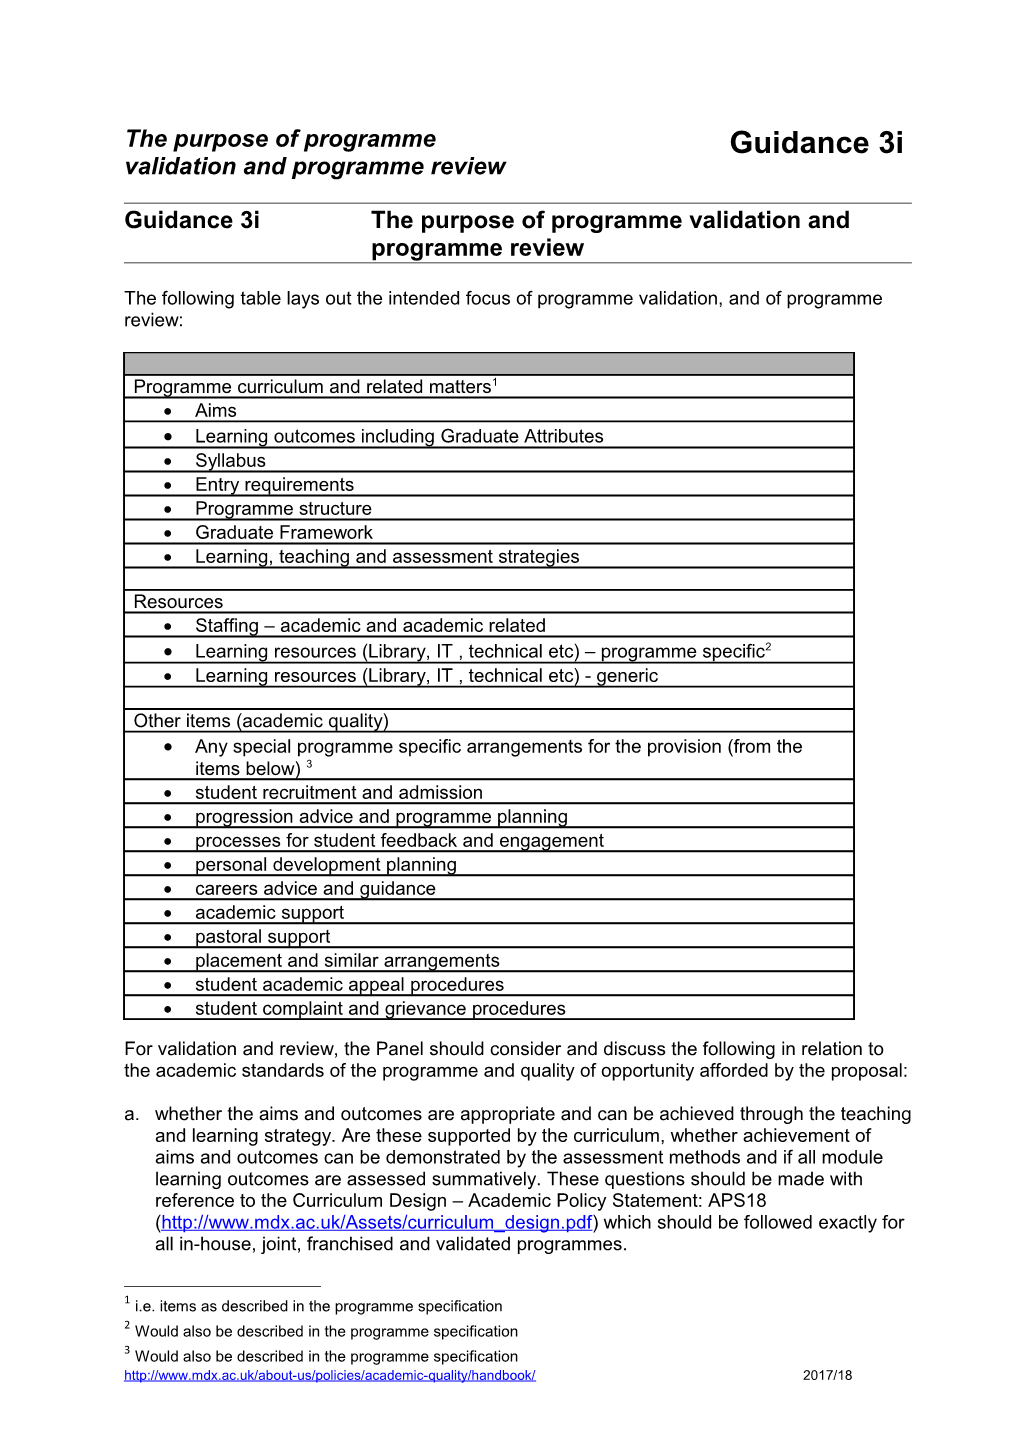 Guidance 3I the Purpose of Programme Validation and Programme Review